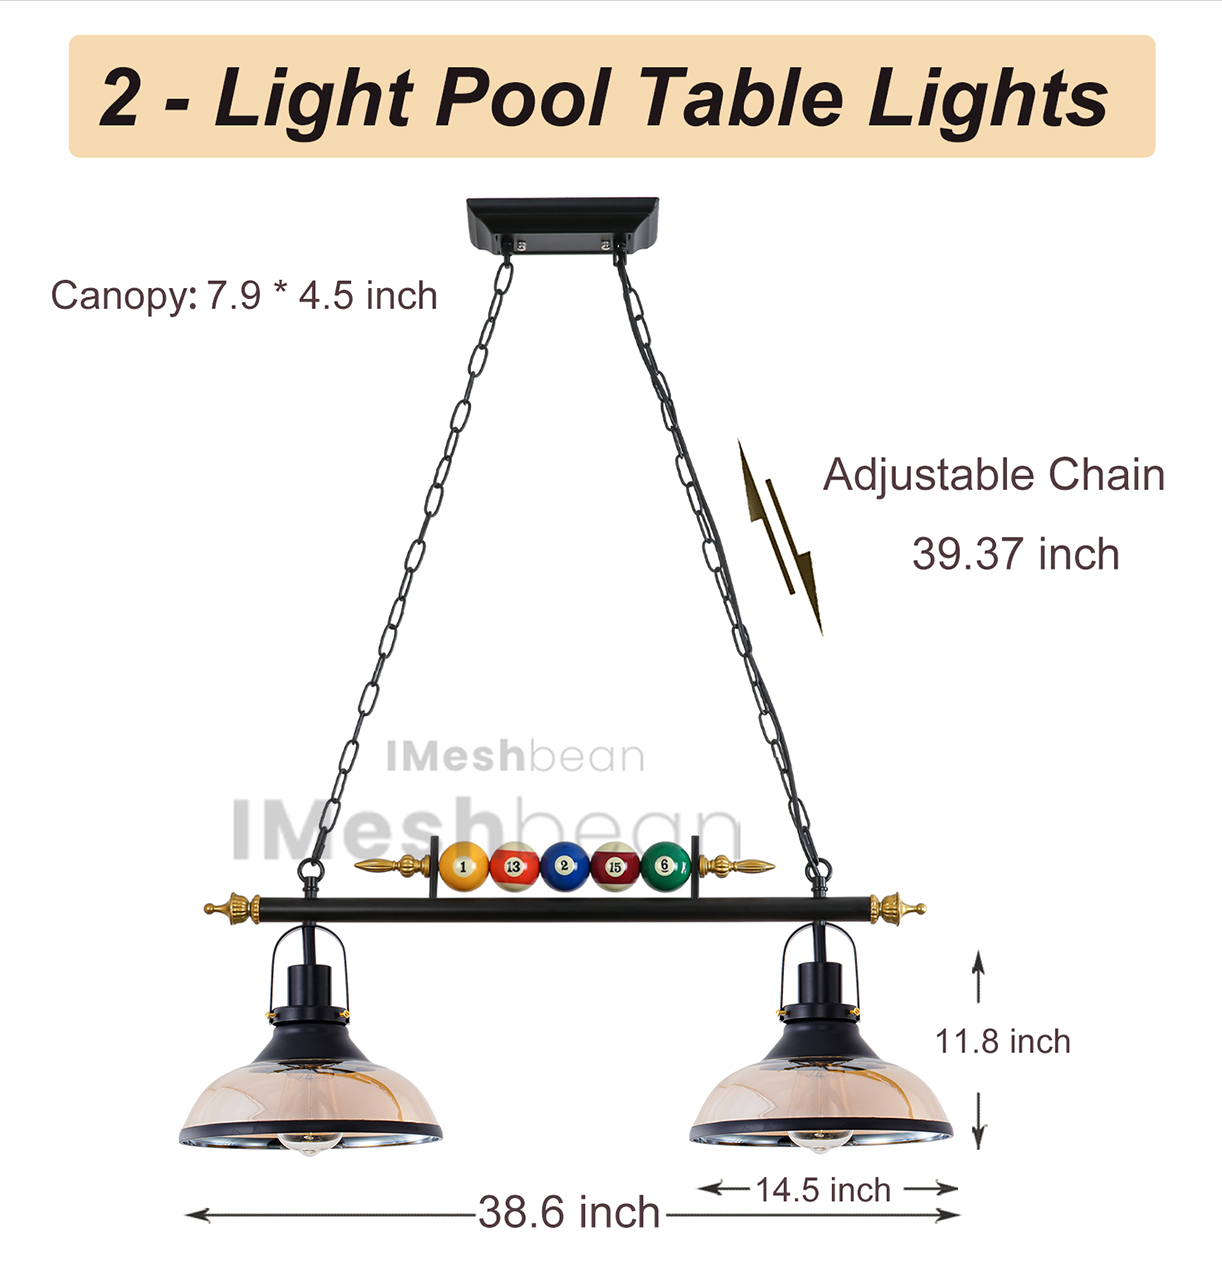 iMeshbean Pool Table Lighting Fixtures Ceiling Lamp for Game Room Beer Party , Real Billiard Ball Design Billiard Pendant Lamp with 2 Glass Shades - image 2 of 10